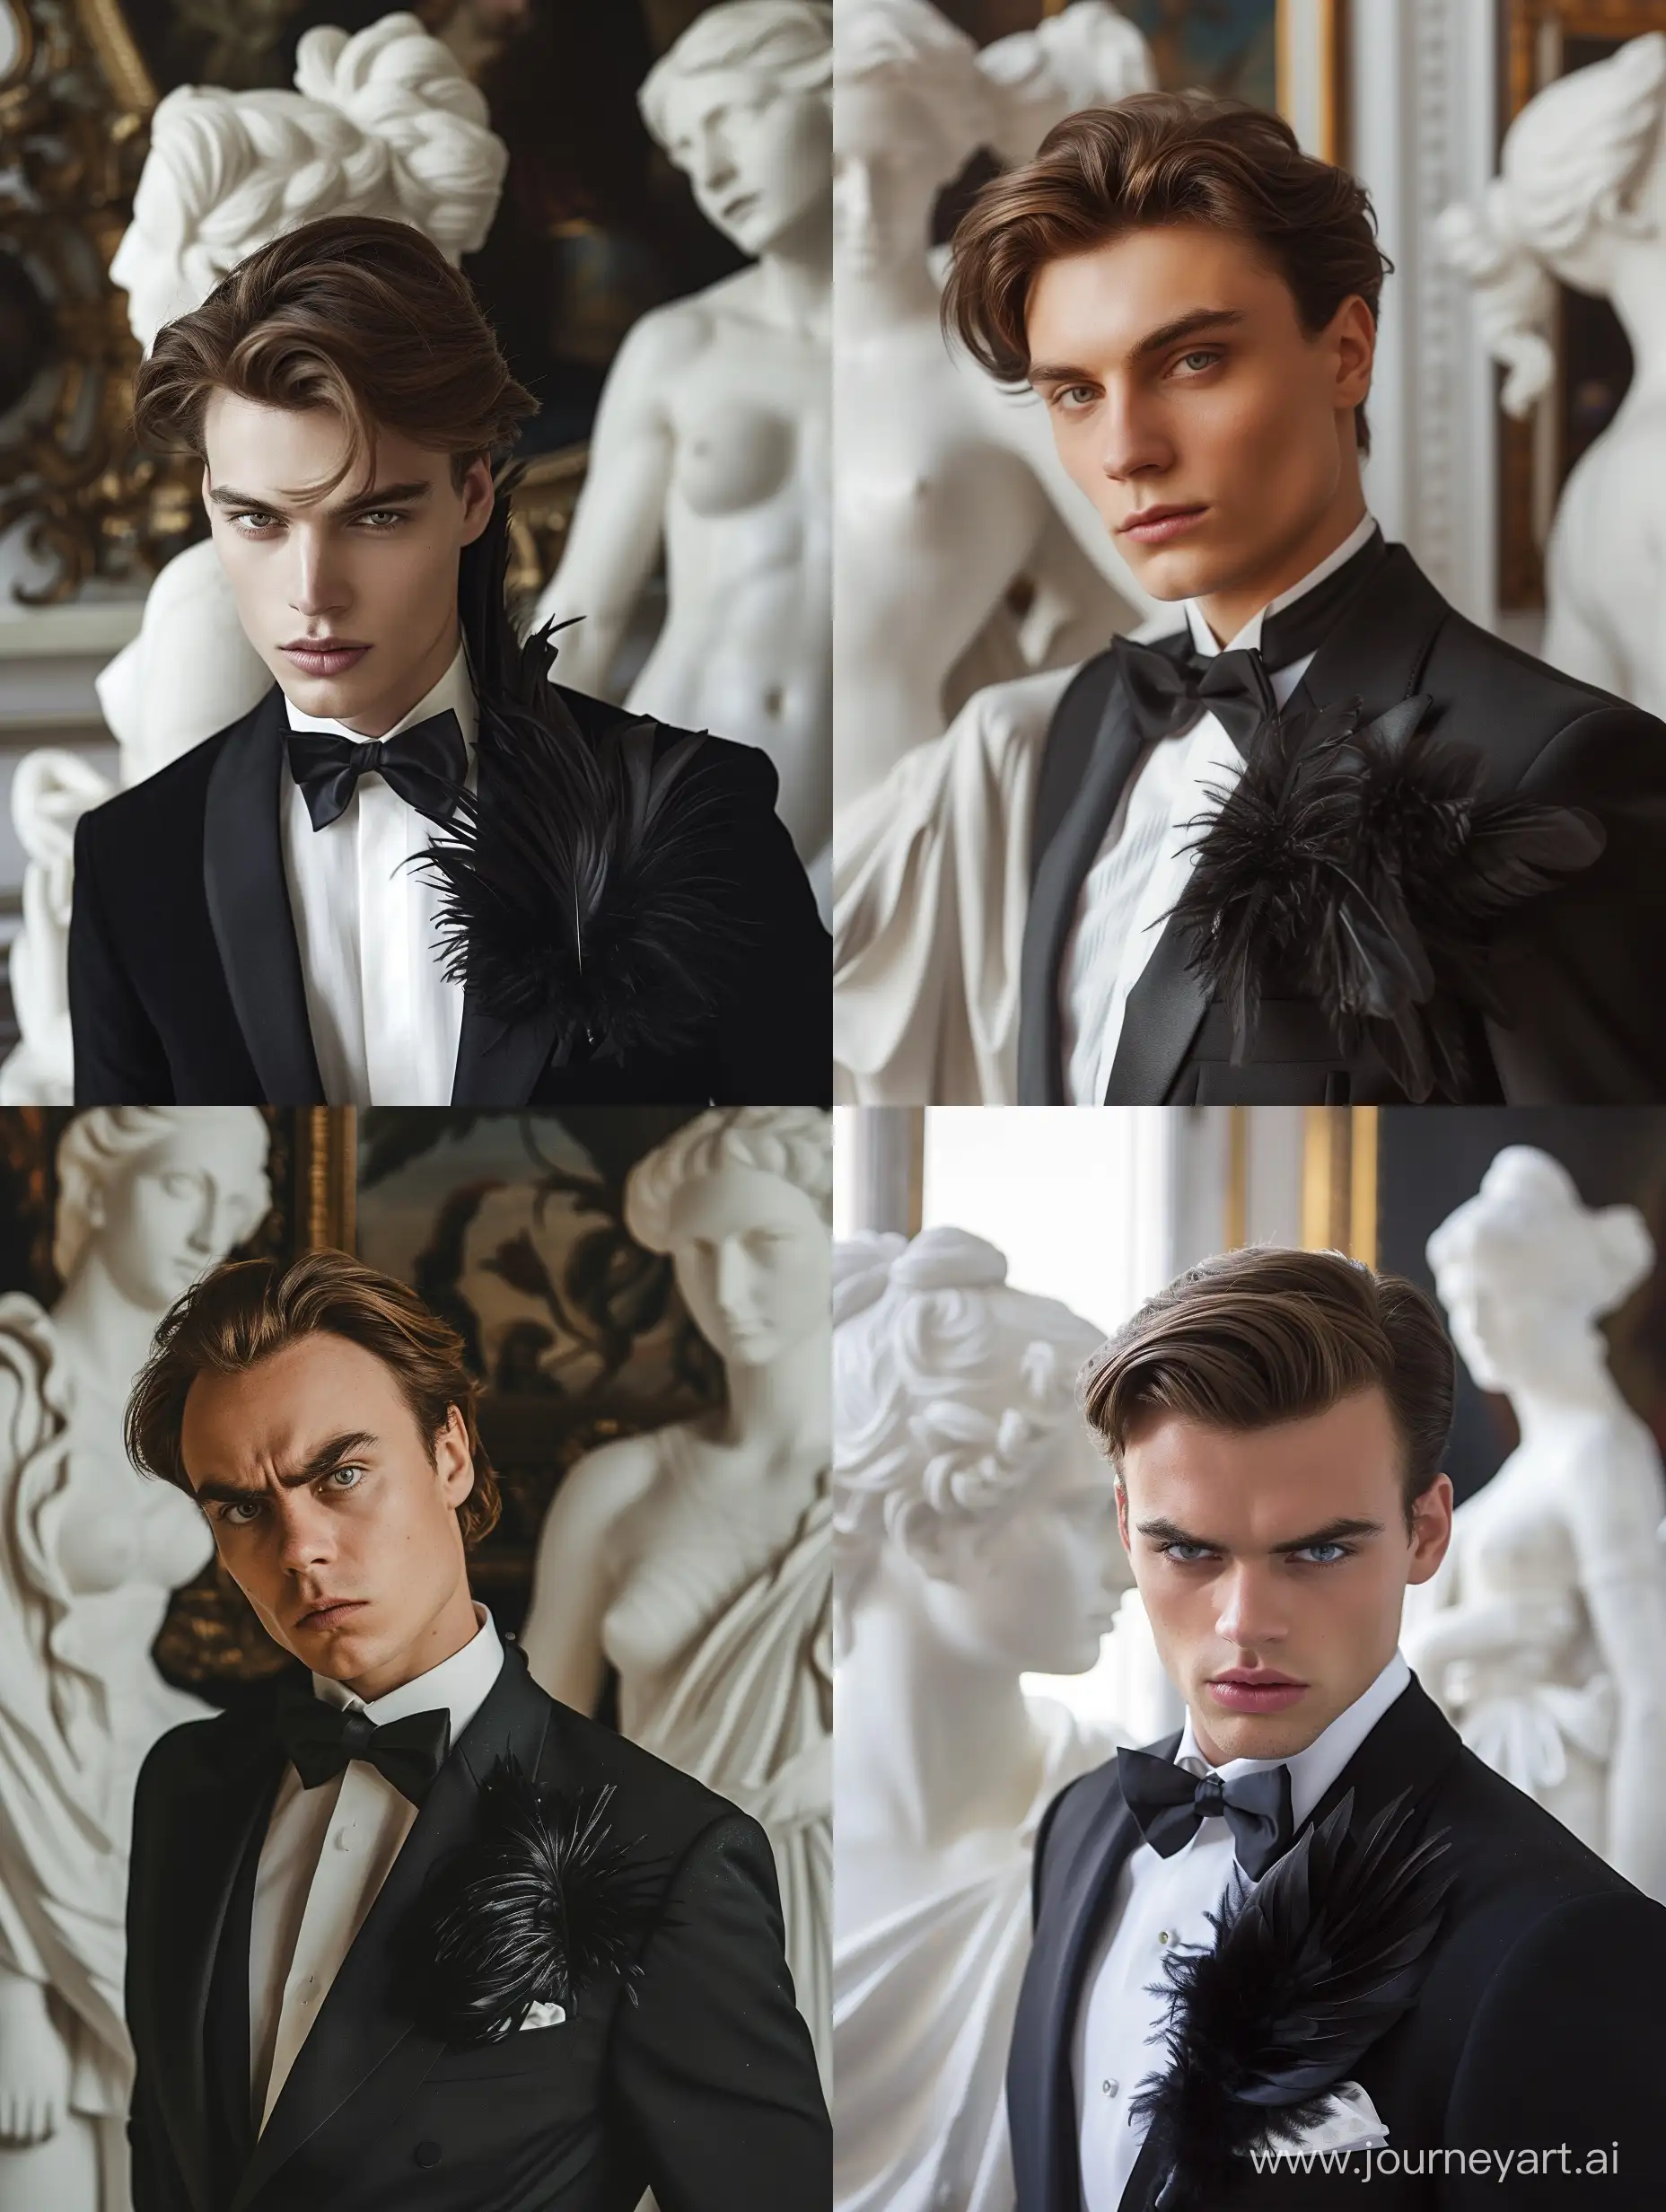 A cool, hyper-realistic photo of a gorgeous 25-year-old brown-haired man with a stern look from under his brows, in a black tuxedo and large black ostrich feathers in his buttonhole, stands near large antique white statues of a female figure, a photo in the style of old Hollywood, retro style of the 40s, the dynamics of angle and pose